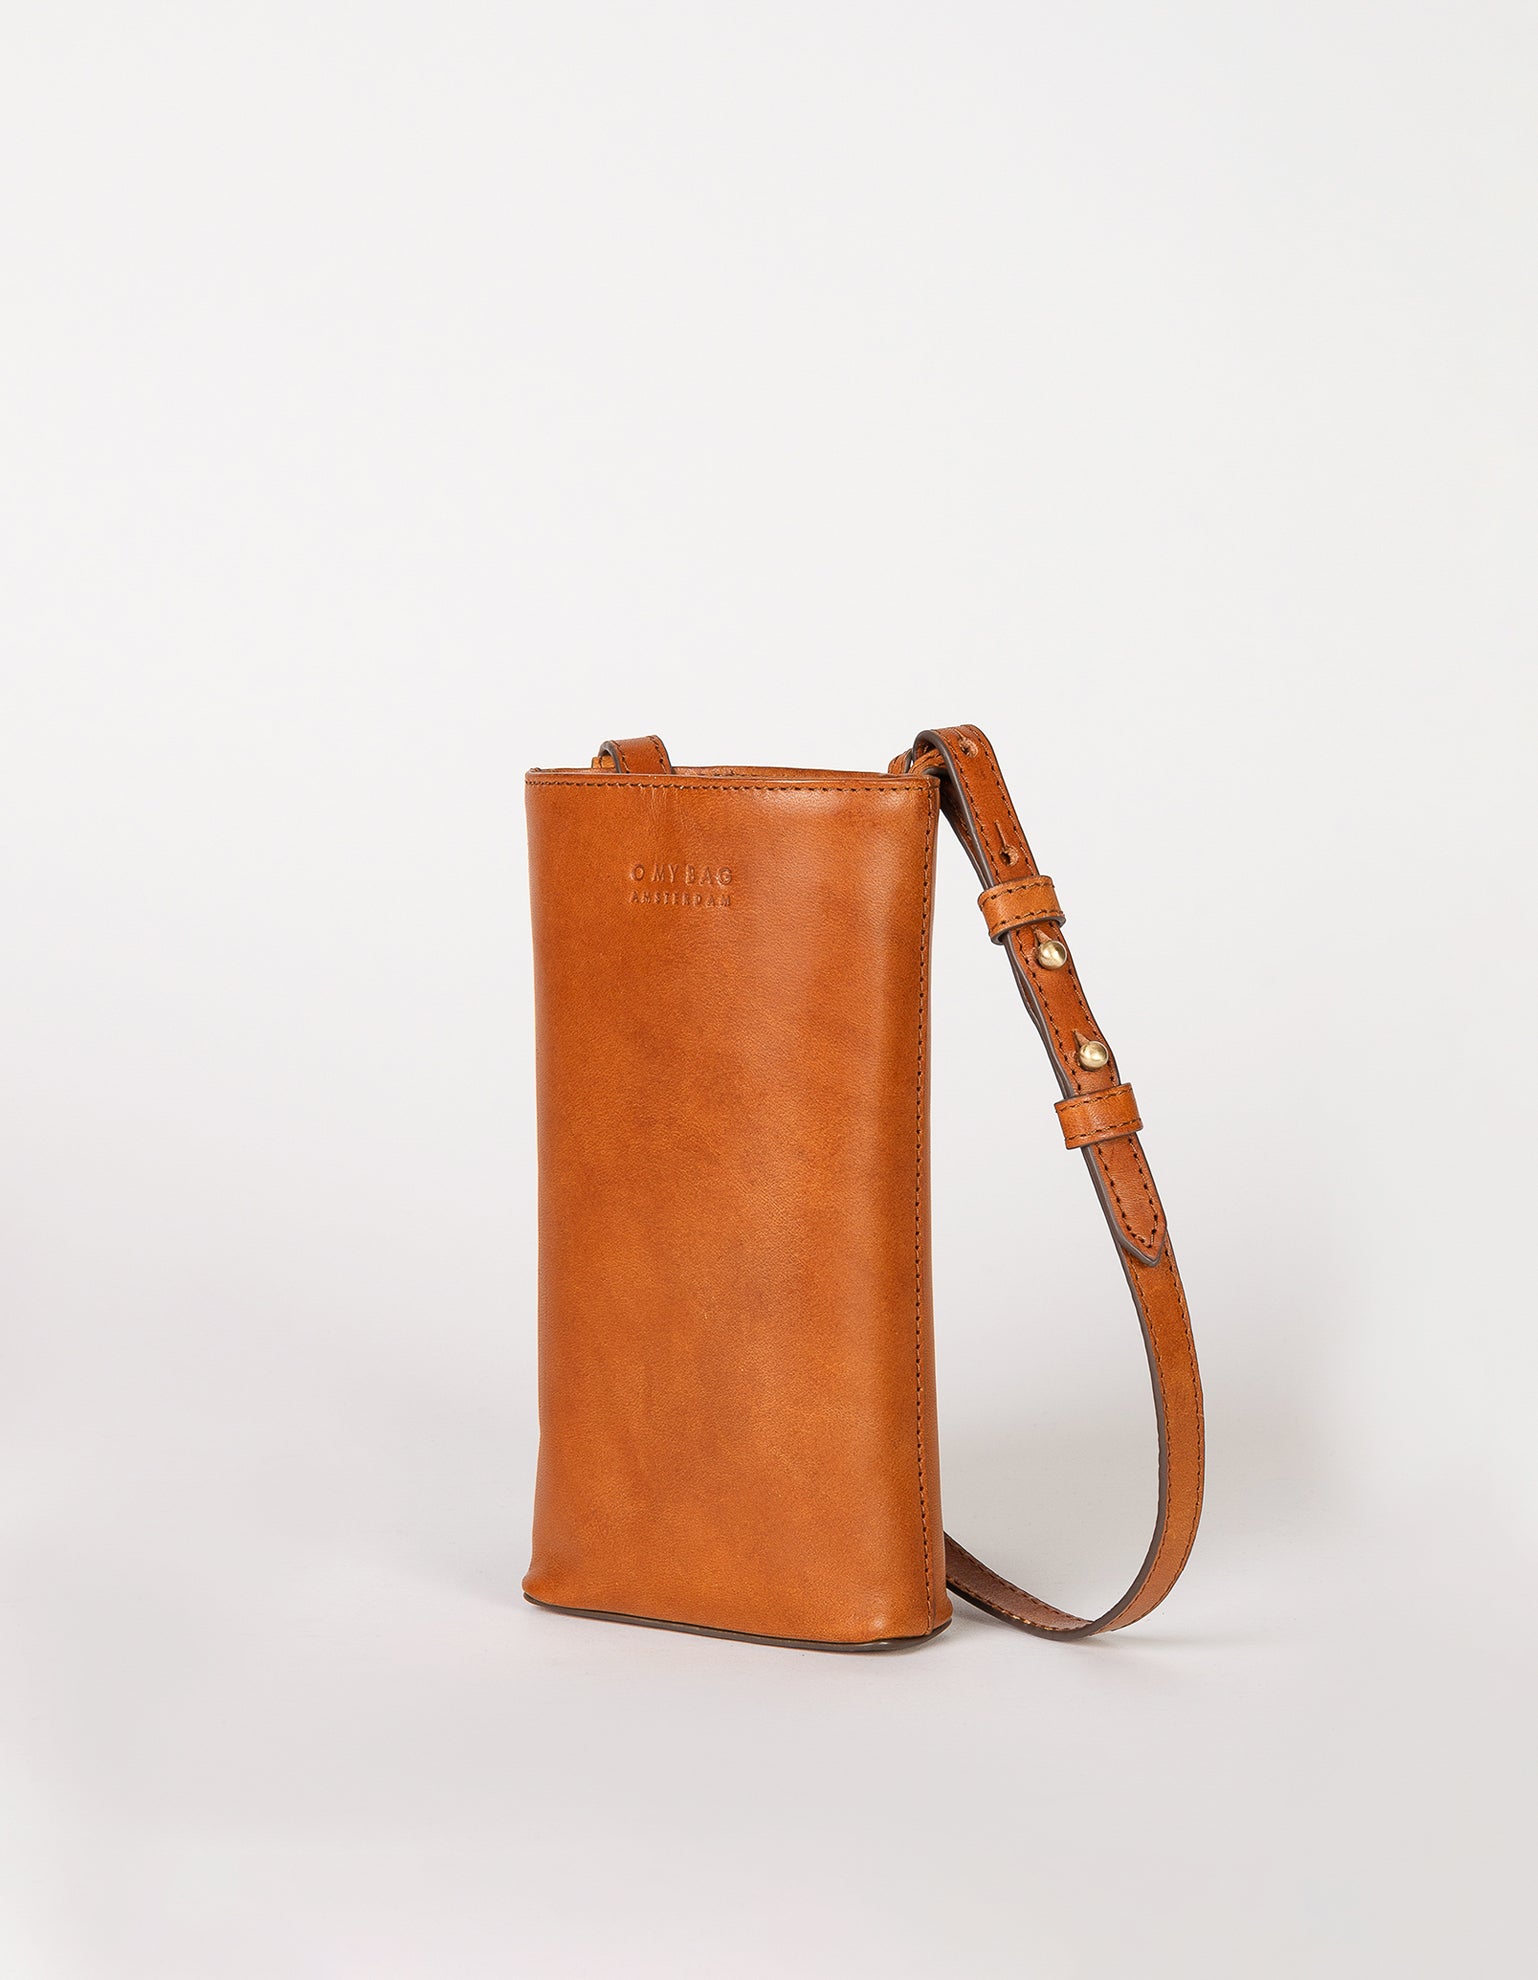 Charlie phone bag - cognac classic leather - side product image with adjustable leather strap